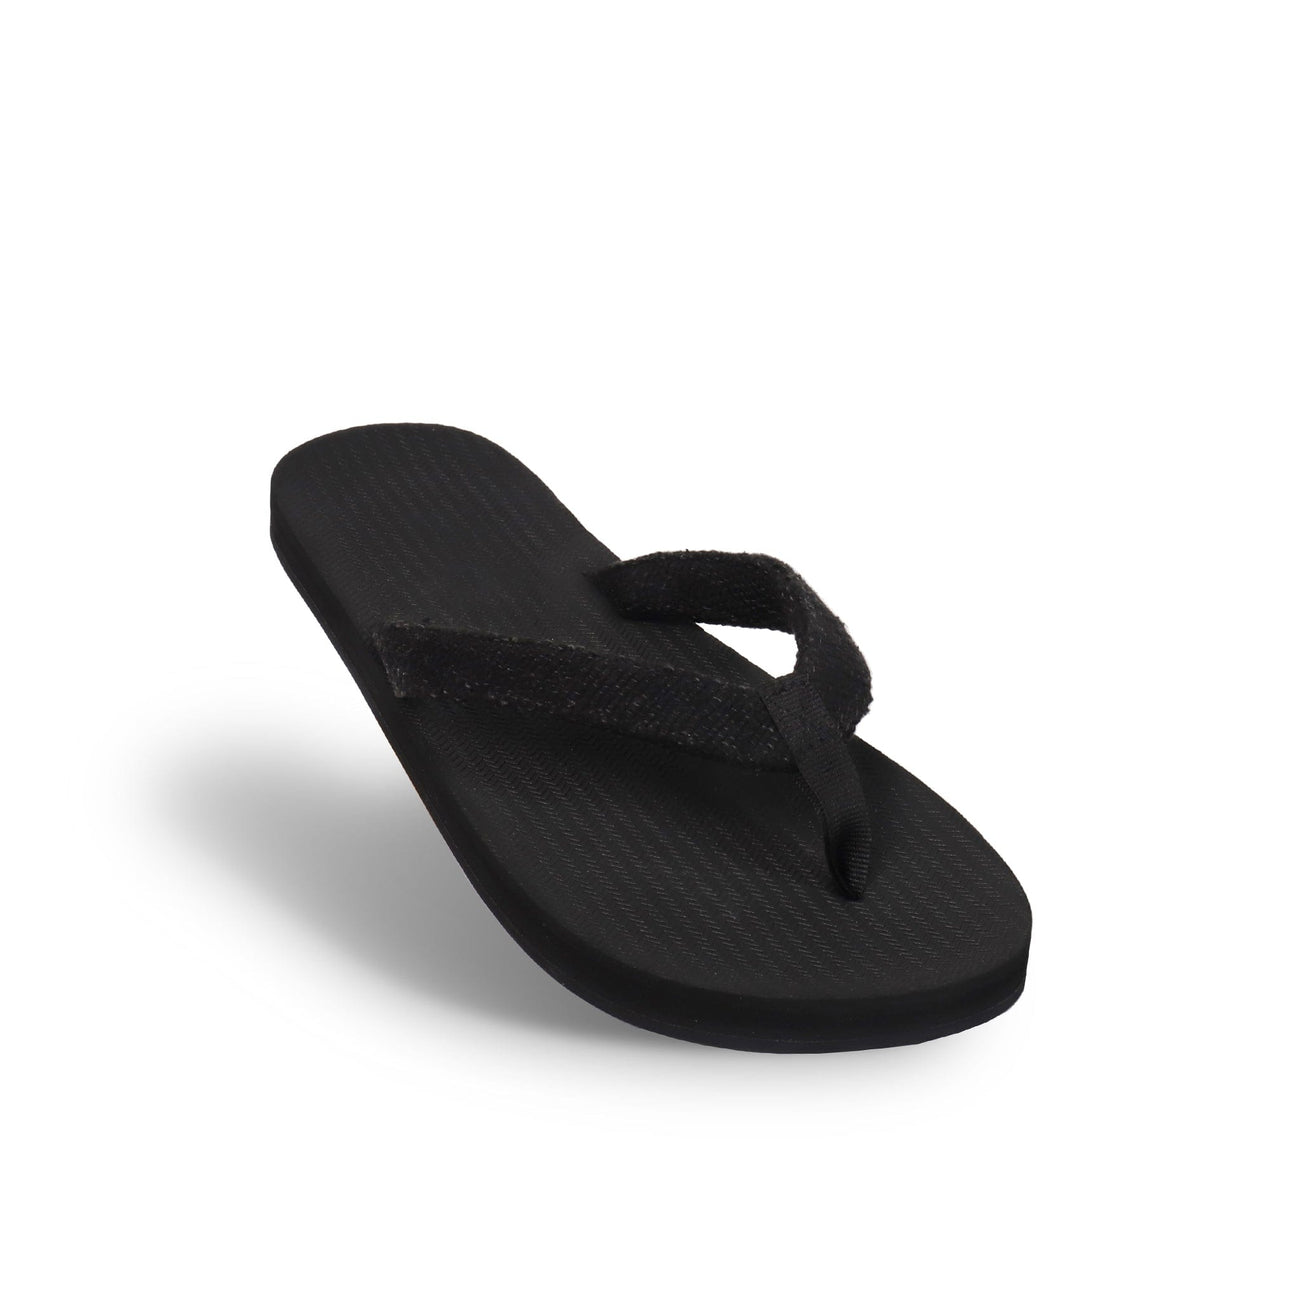 Indosole - Women's Recycled Pable Flip Flops - eco friendly footwear - all things being eco chilliwack canada - made from recycled textiles - fair trade and ethical shoes - women's clothing, accessories and shoes store